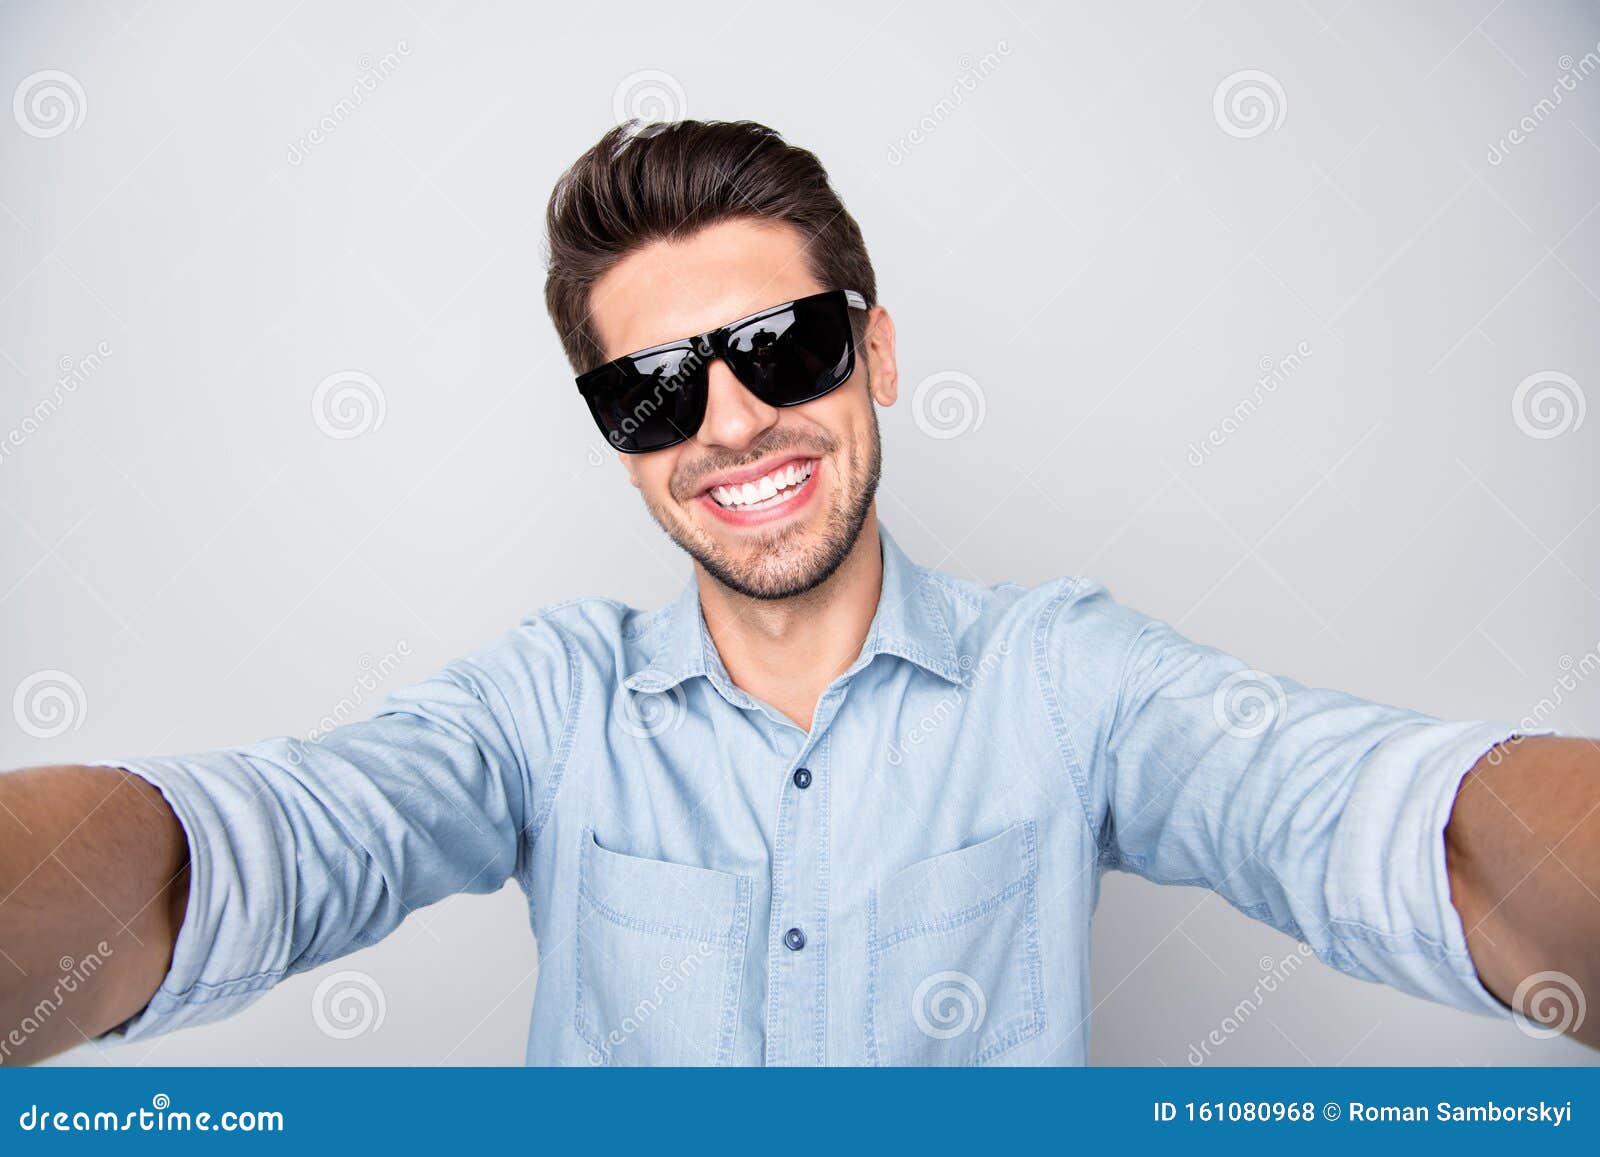 Photo of White Cheerful Attractive Handsome Man Taking Selfie Showing ...